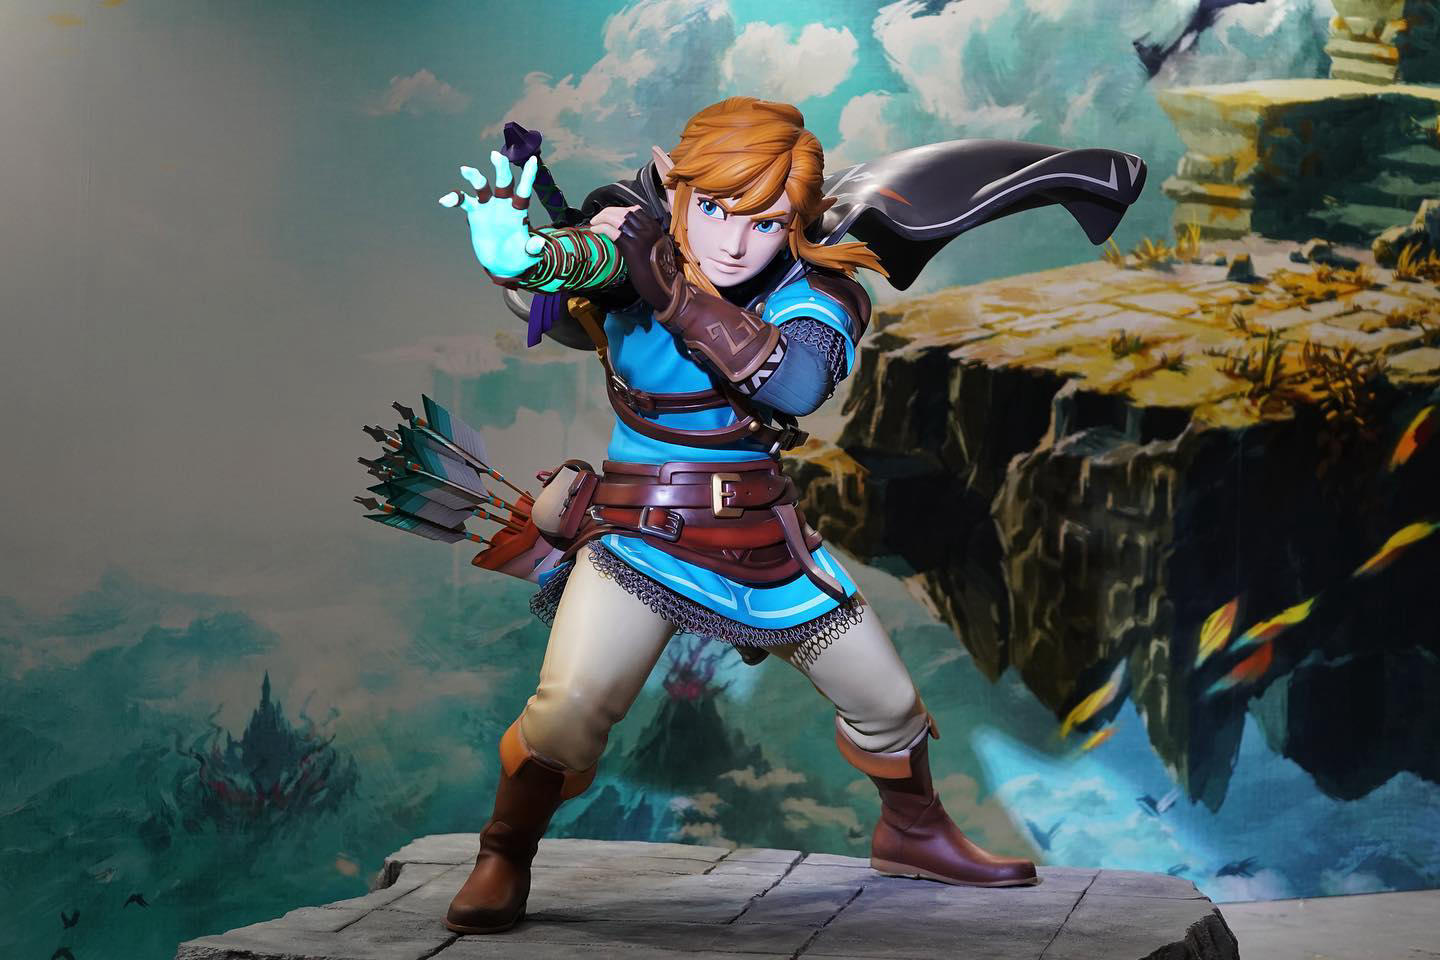 Nintendo of America - Check out this statue of Link from The Legend of #Zelda